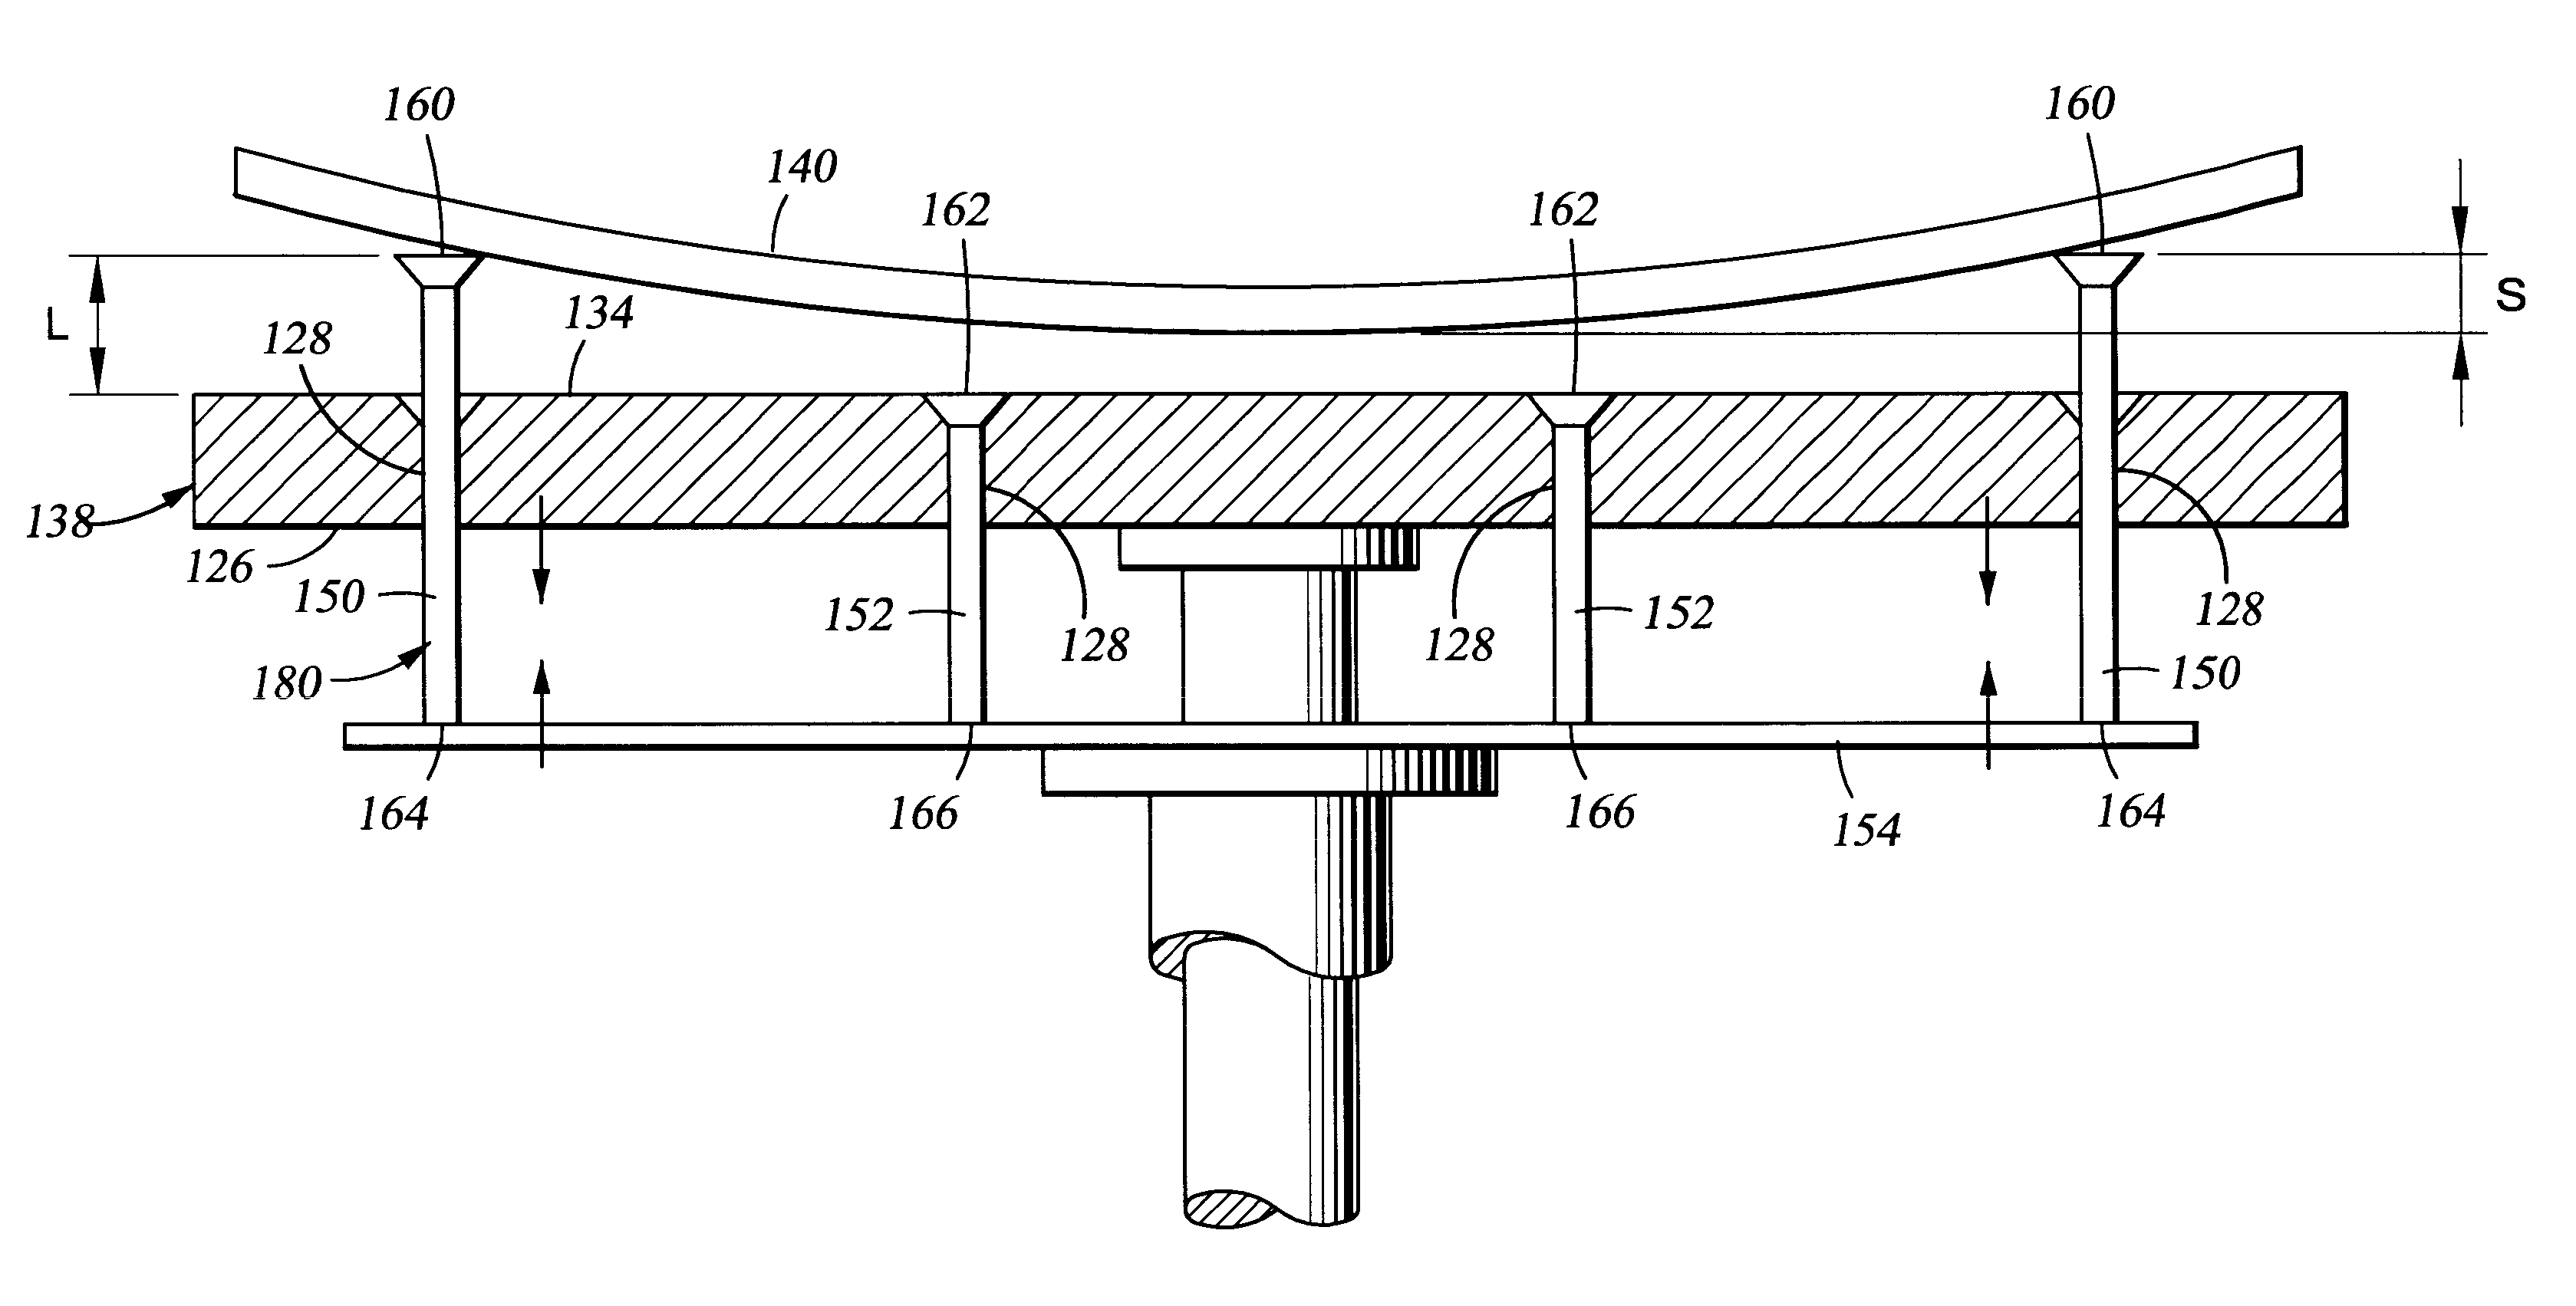 Method and apparatus for dechucking a substrate